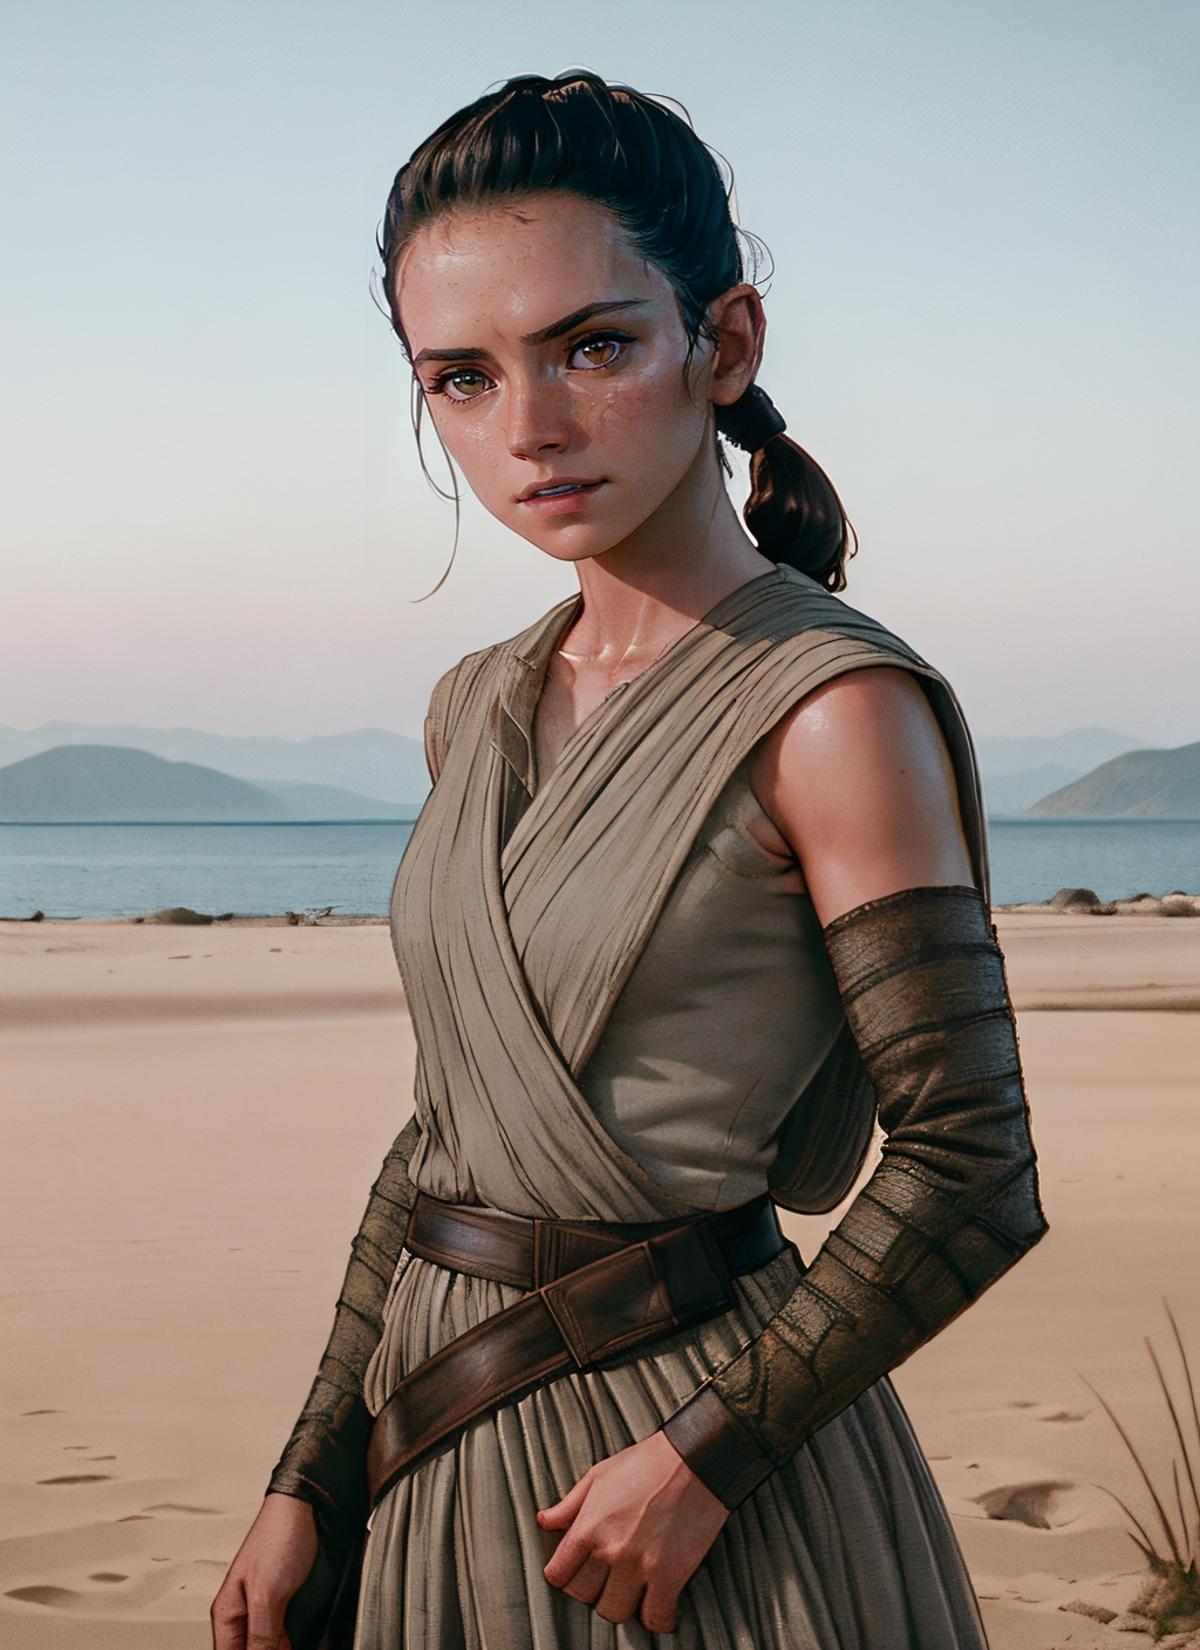 Rey from Star Wars (Daisy Ridley) image by ceciliosonata390